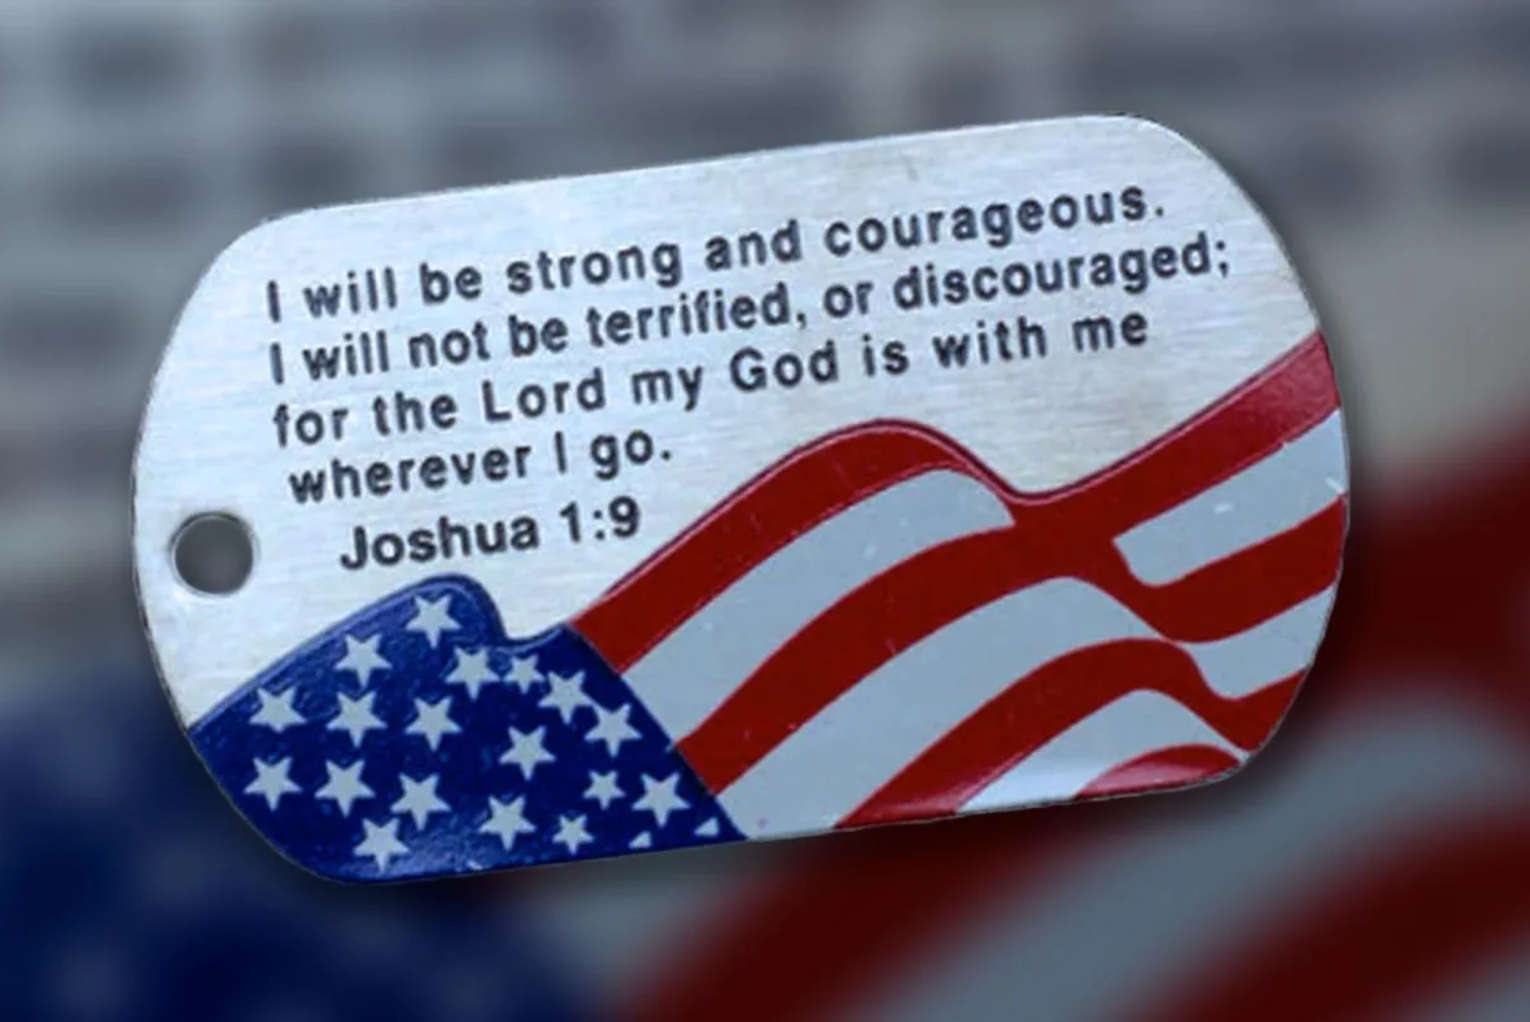 ‘Shields of Strength’ to Sue DoD Over Military Dog Tags with Bible Verses